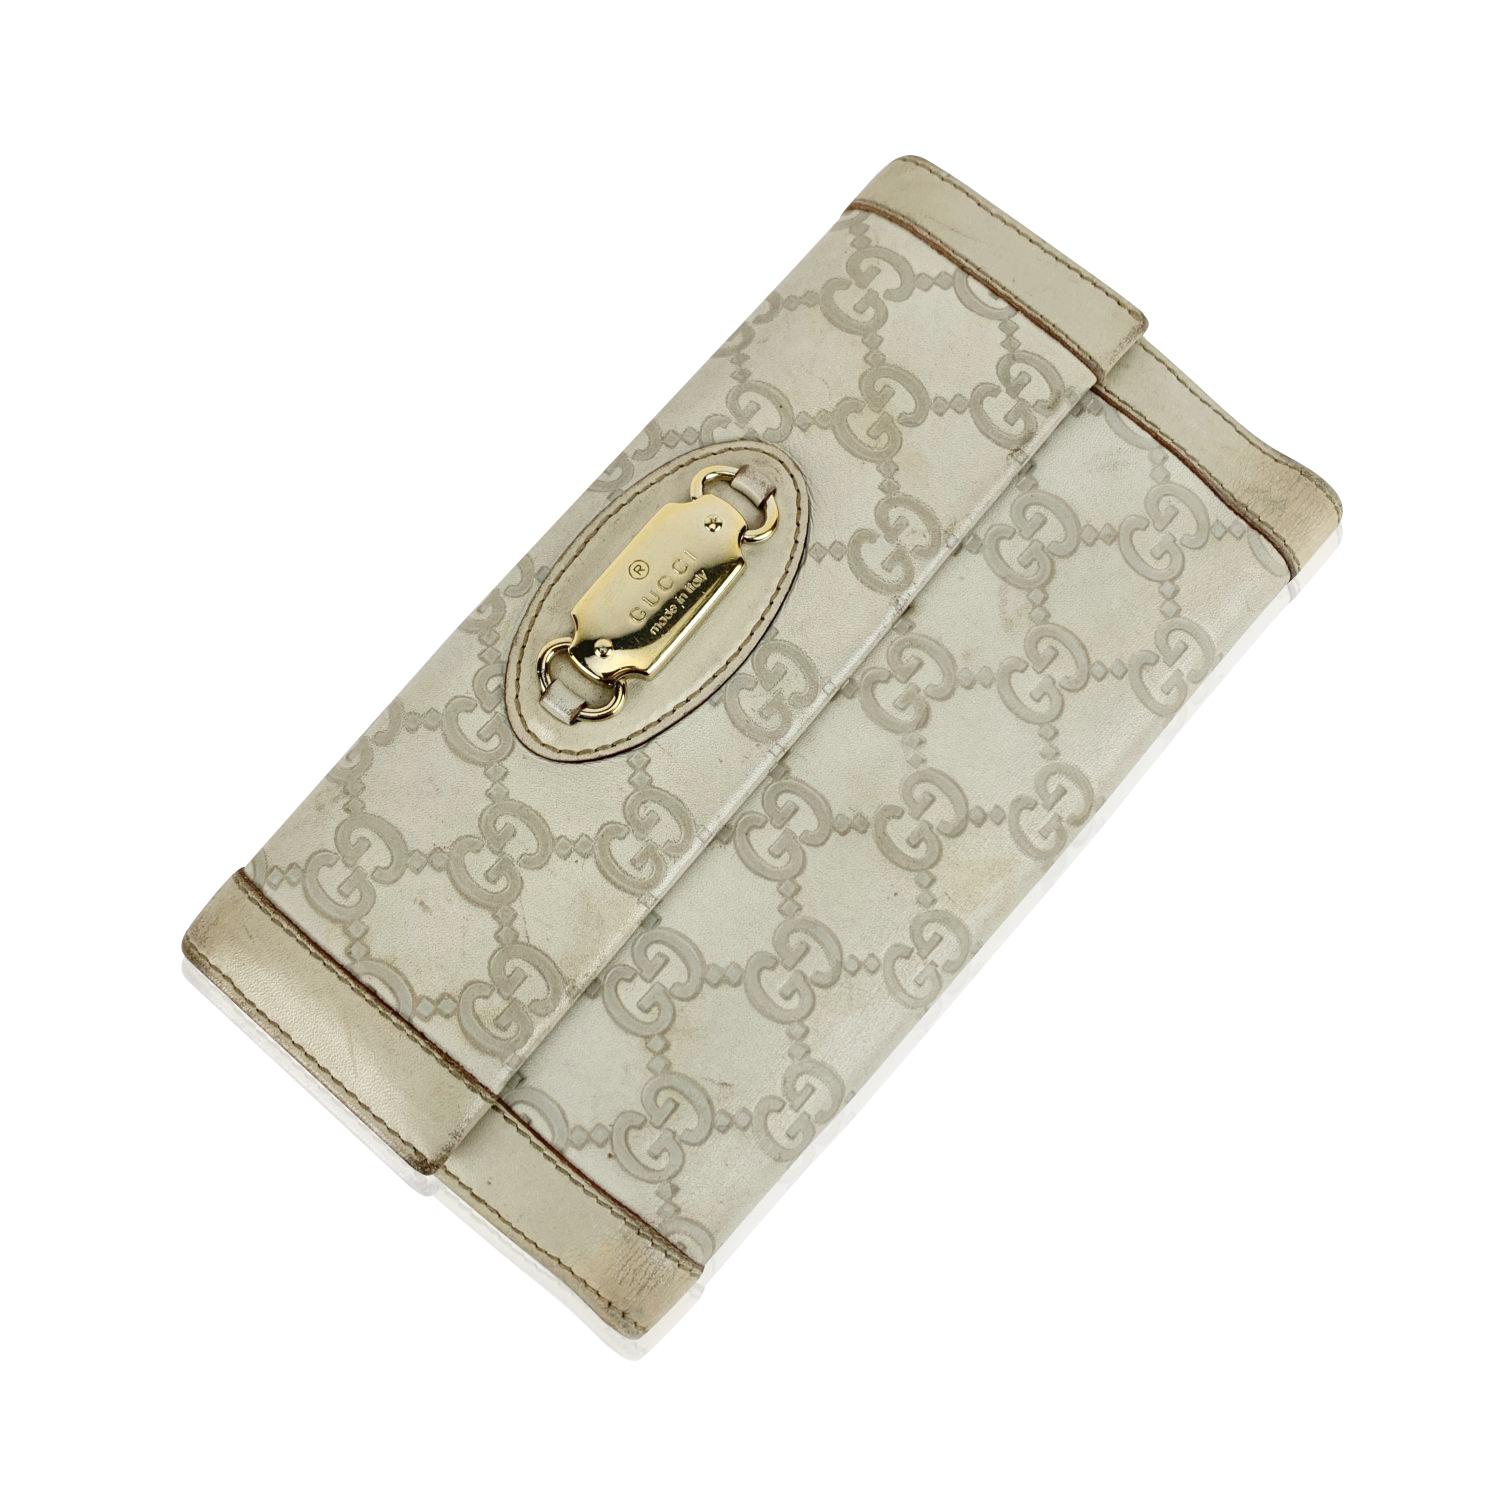 GUCCI off white continental 'Punch' wallet in off-white Guccissima leather. Flap with button closure on the front. Gold metal Gucci plate on the front. Fold over strap with button closure on the back. 7 credit card slots, 1 bill compartment and 2